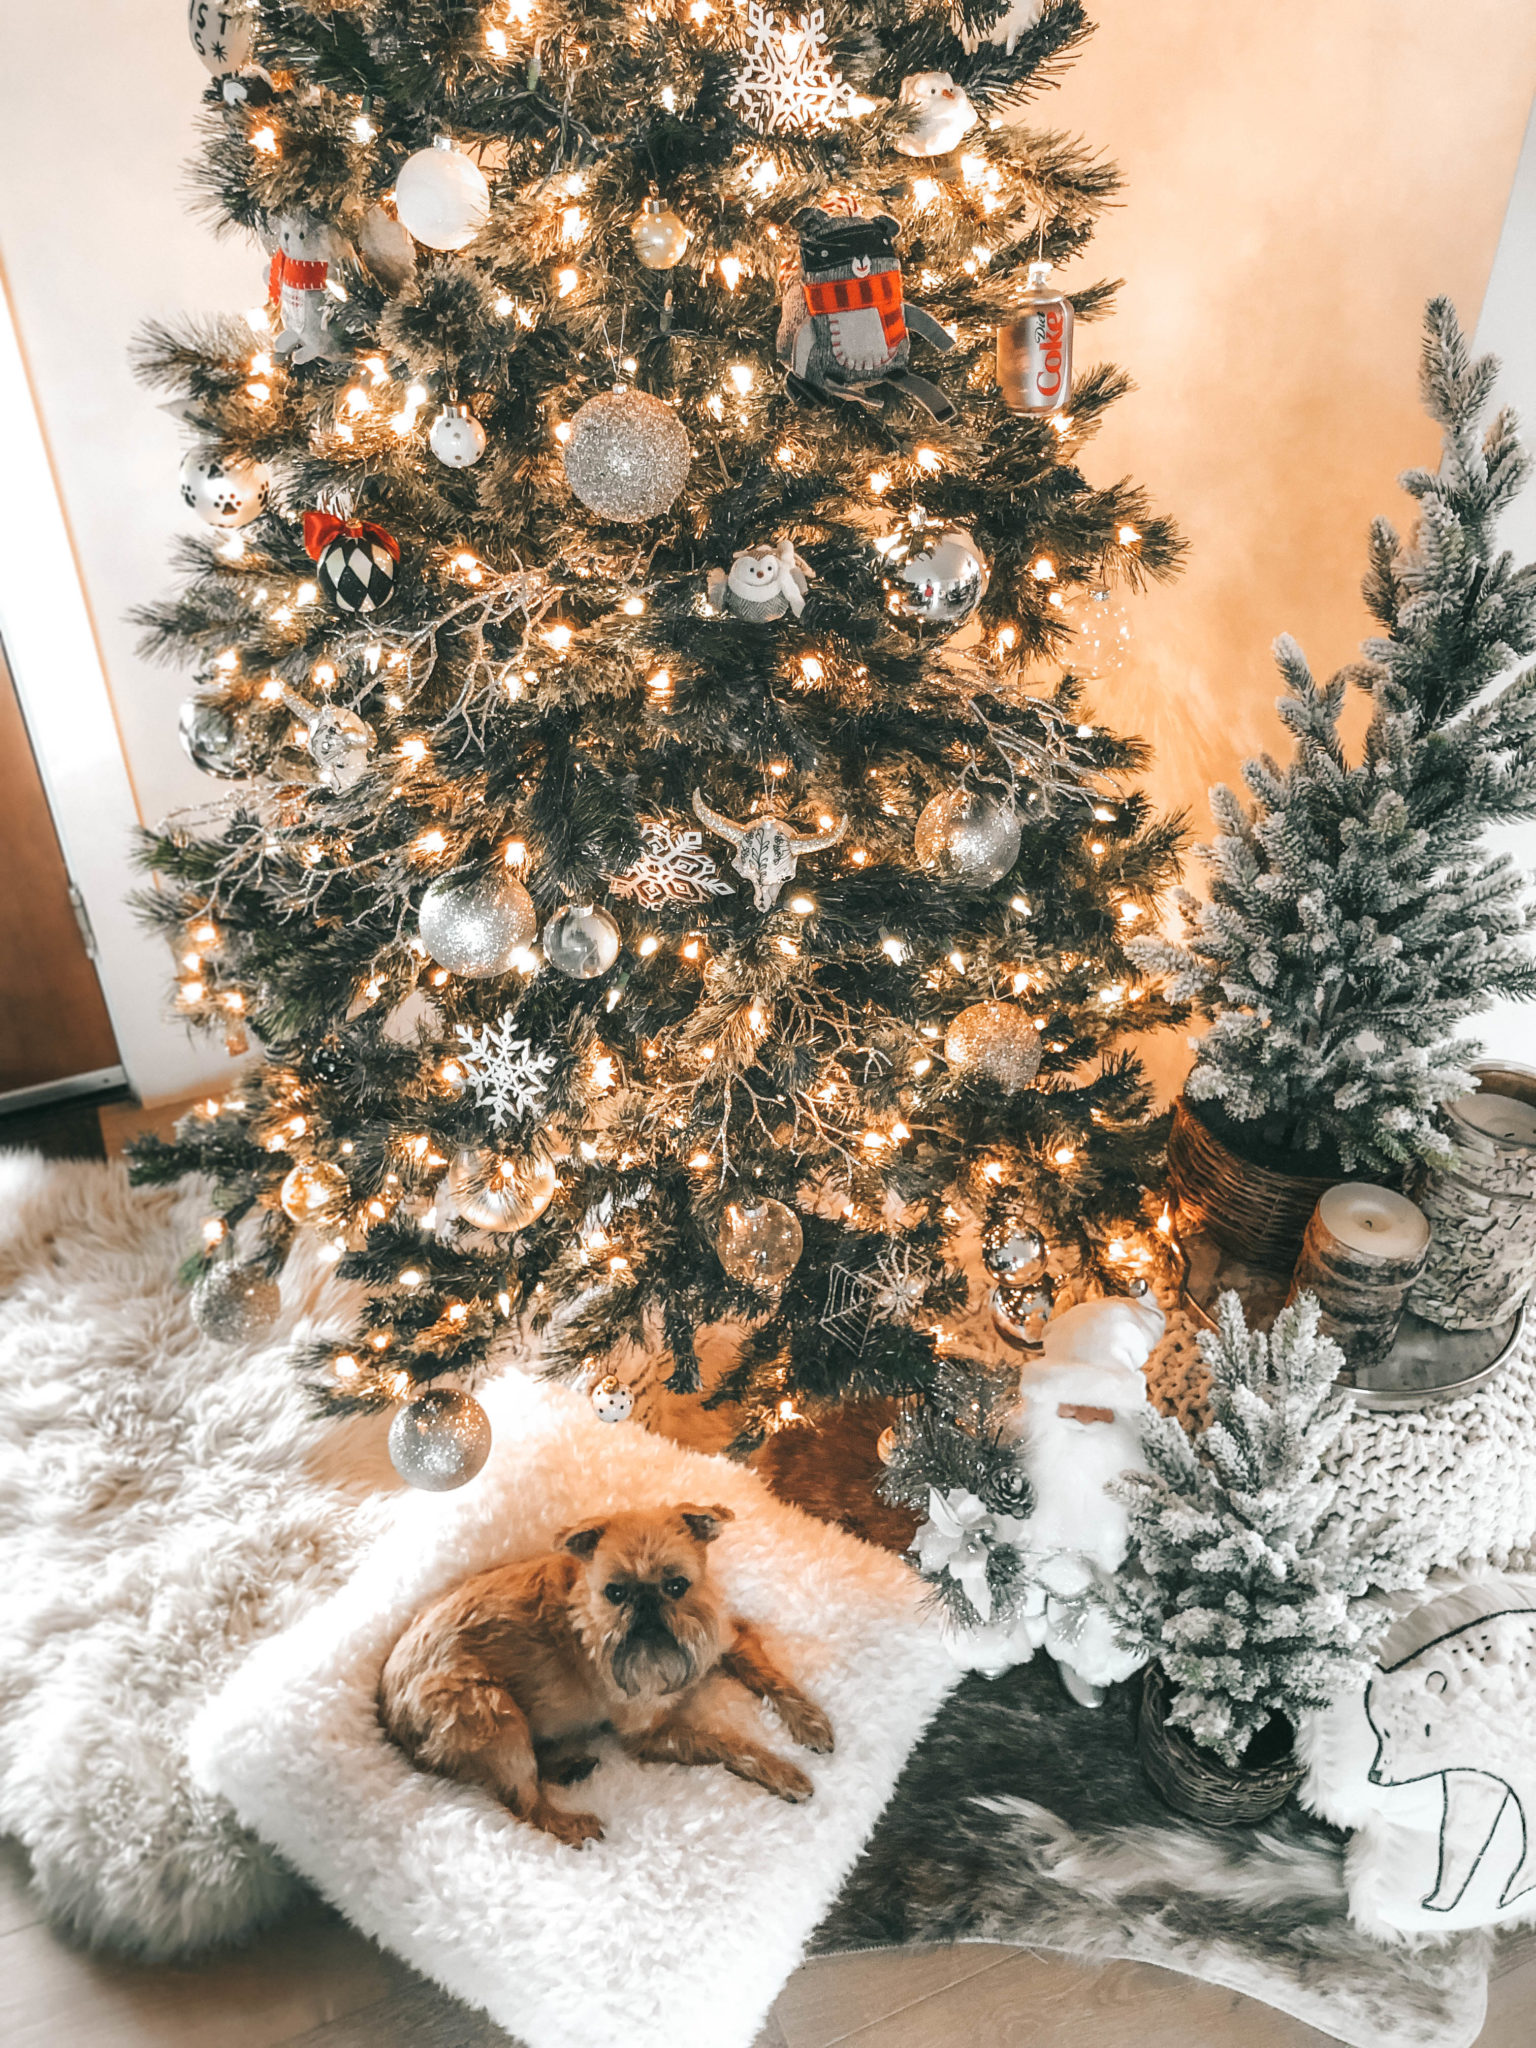 DTKAustin is sharing The Best Holiday Gift Ideas for Dogs & Their Owners. From dog beds to dog toys to dog treats this gift guide has everything you need to spoil your dog. || Dressed to Kill #petlovers #doglovers #petgiftguide #dtkaustin